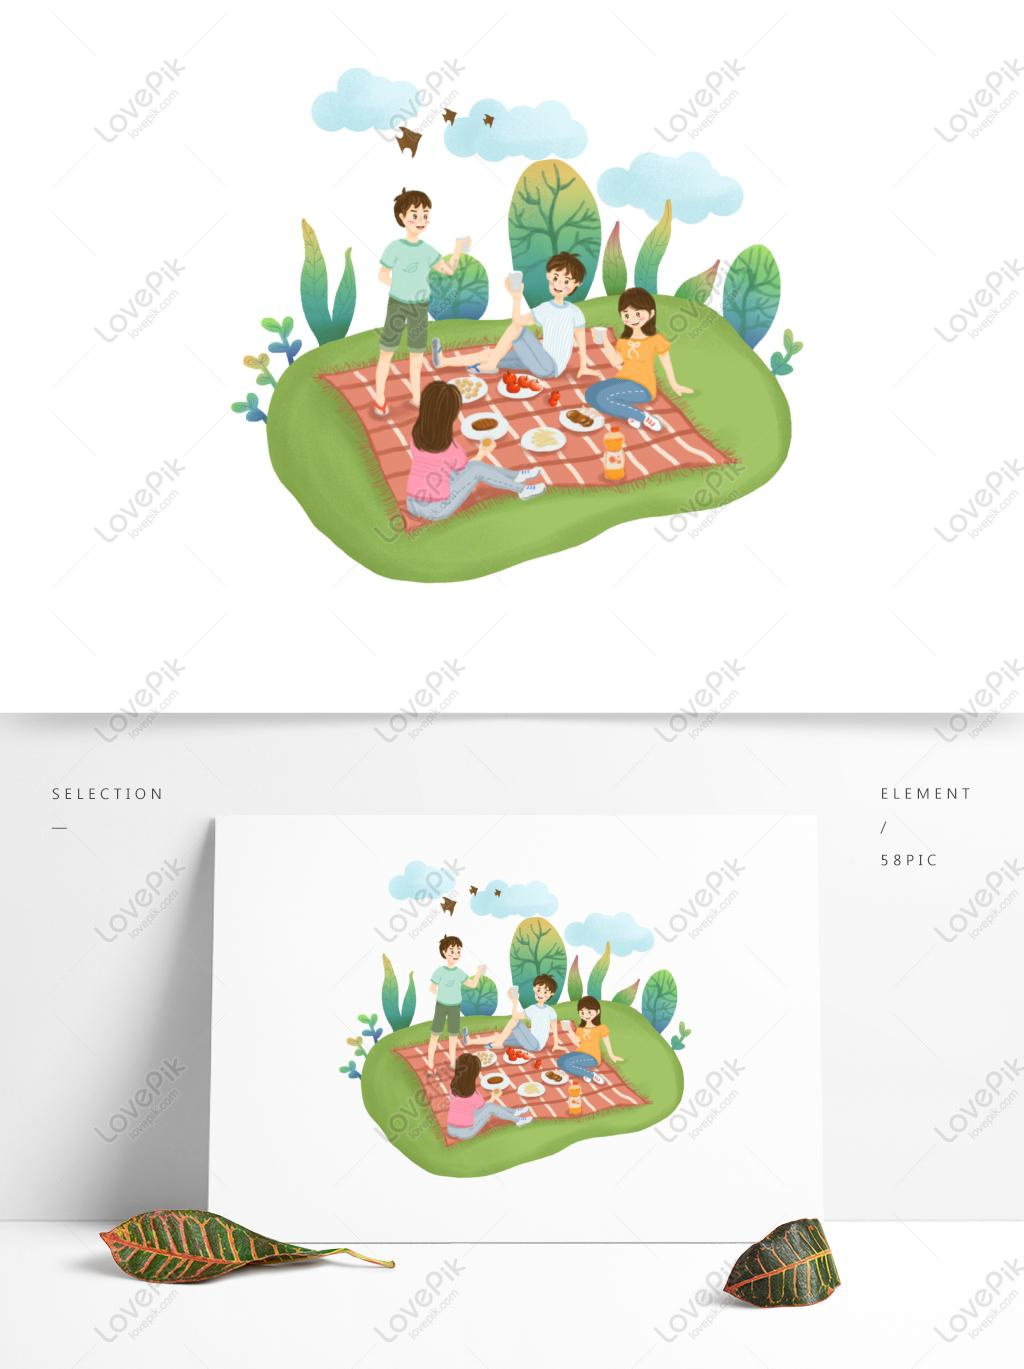 Wild Donkey Scene Character Picnic Element Hand Drawn Cartoon Ch PNG  Transparent Background PSD images free download_1369 × 1024 px - Lovepik